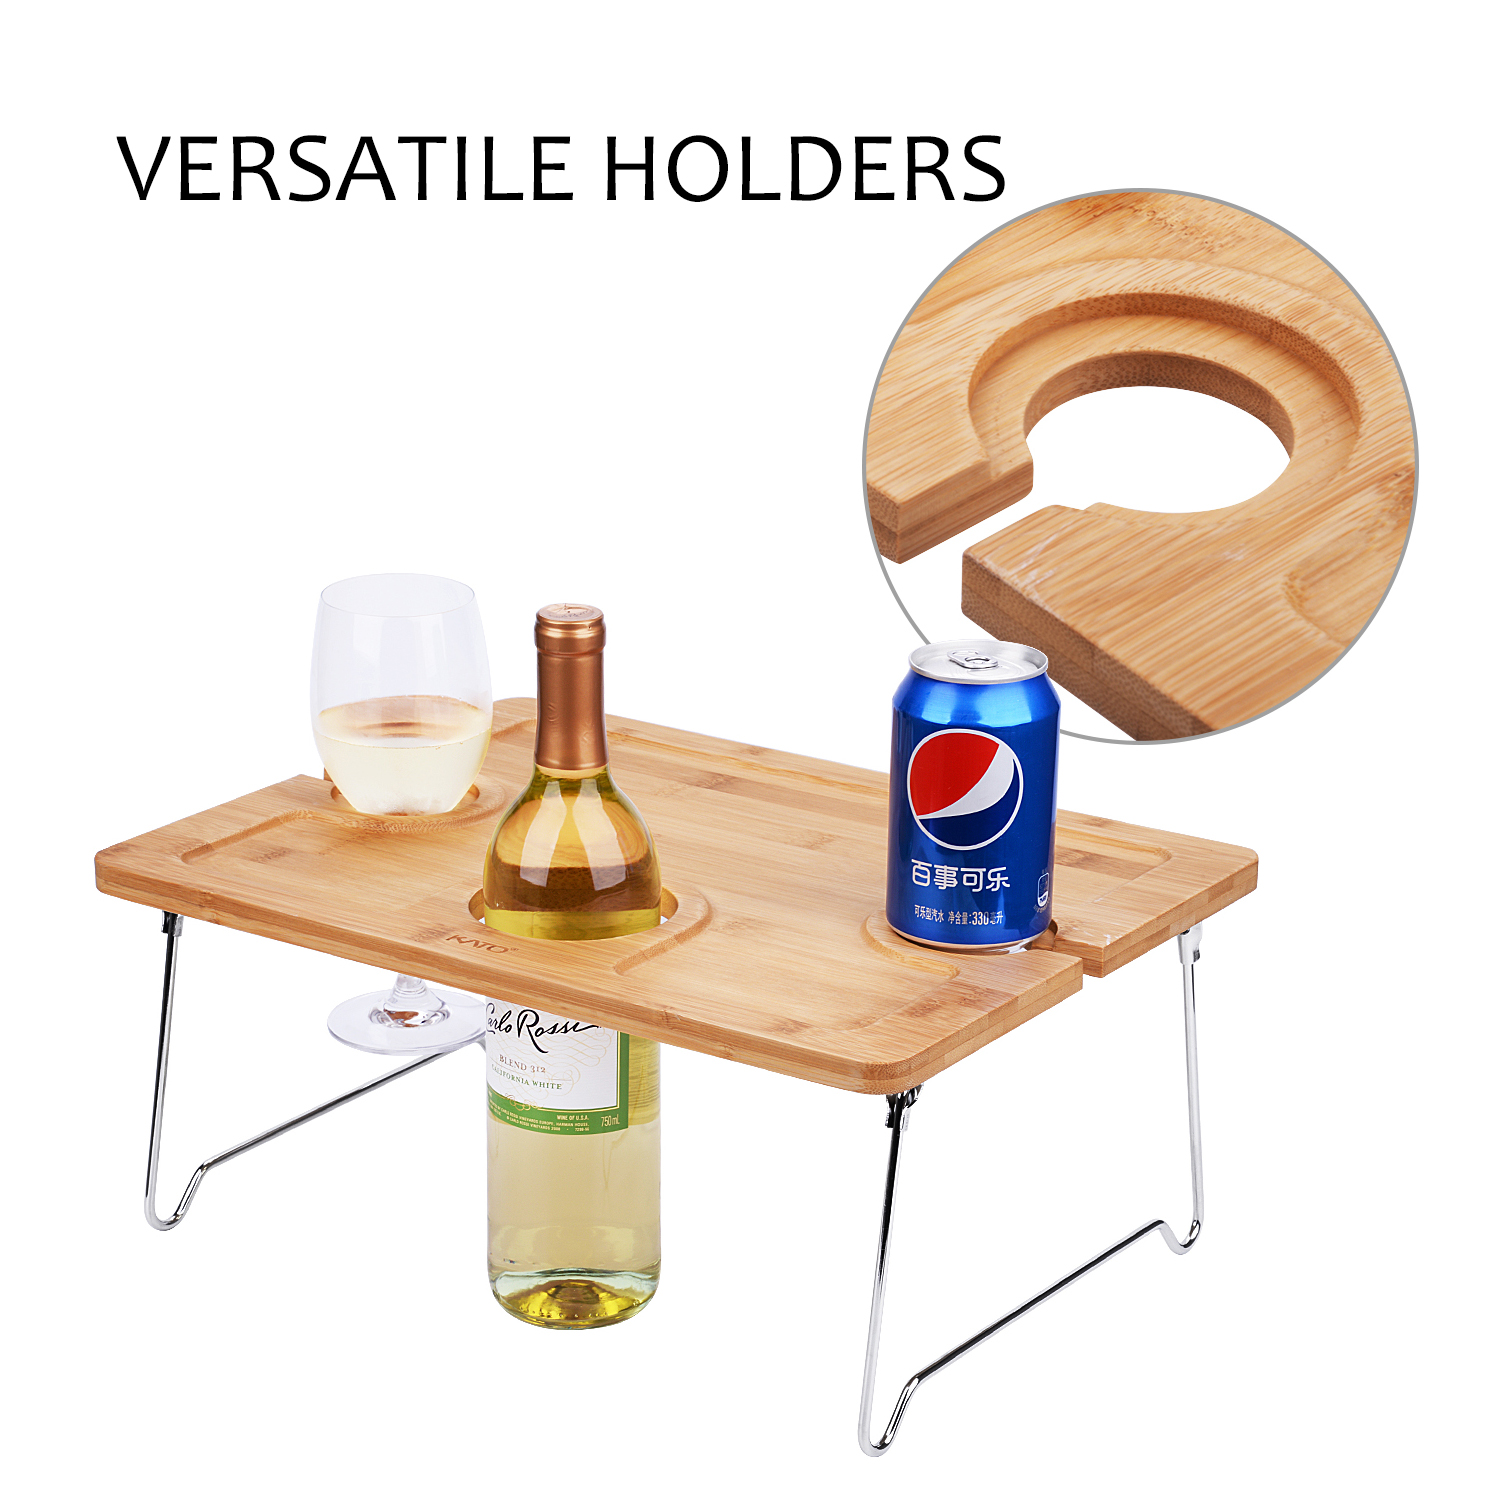 Kato Outdoor Wine Picnic Table, Folding Portable Bamboo Camping Table with Wine Glasses & Bottle Holder for Concerts at Park, Beach, Ideal Wine Lover Gift - image 3 of 9